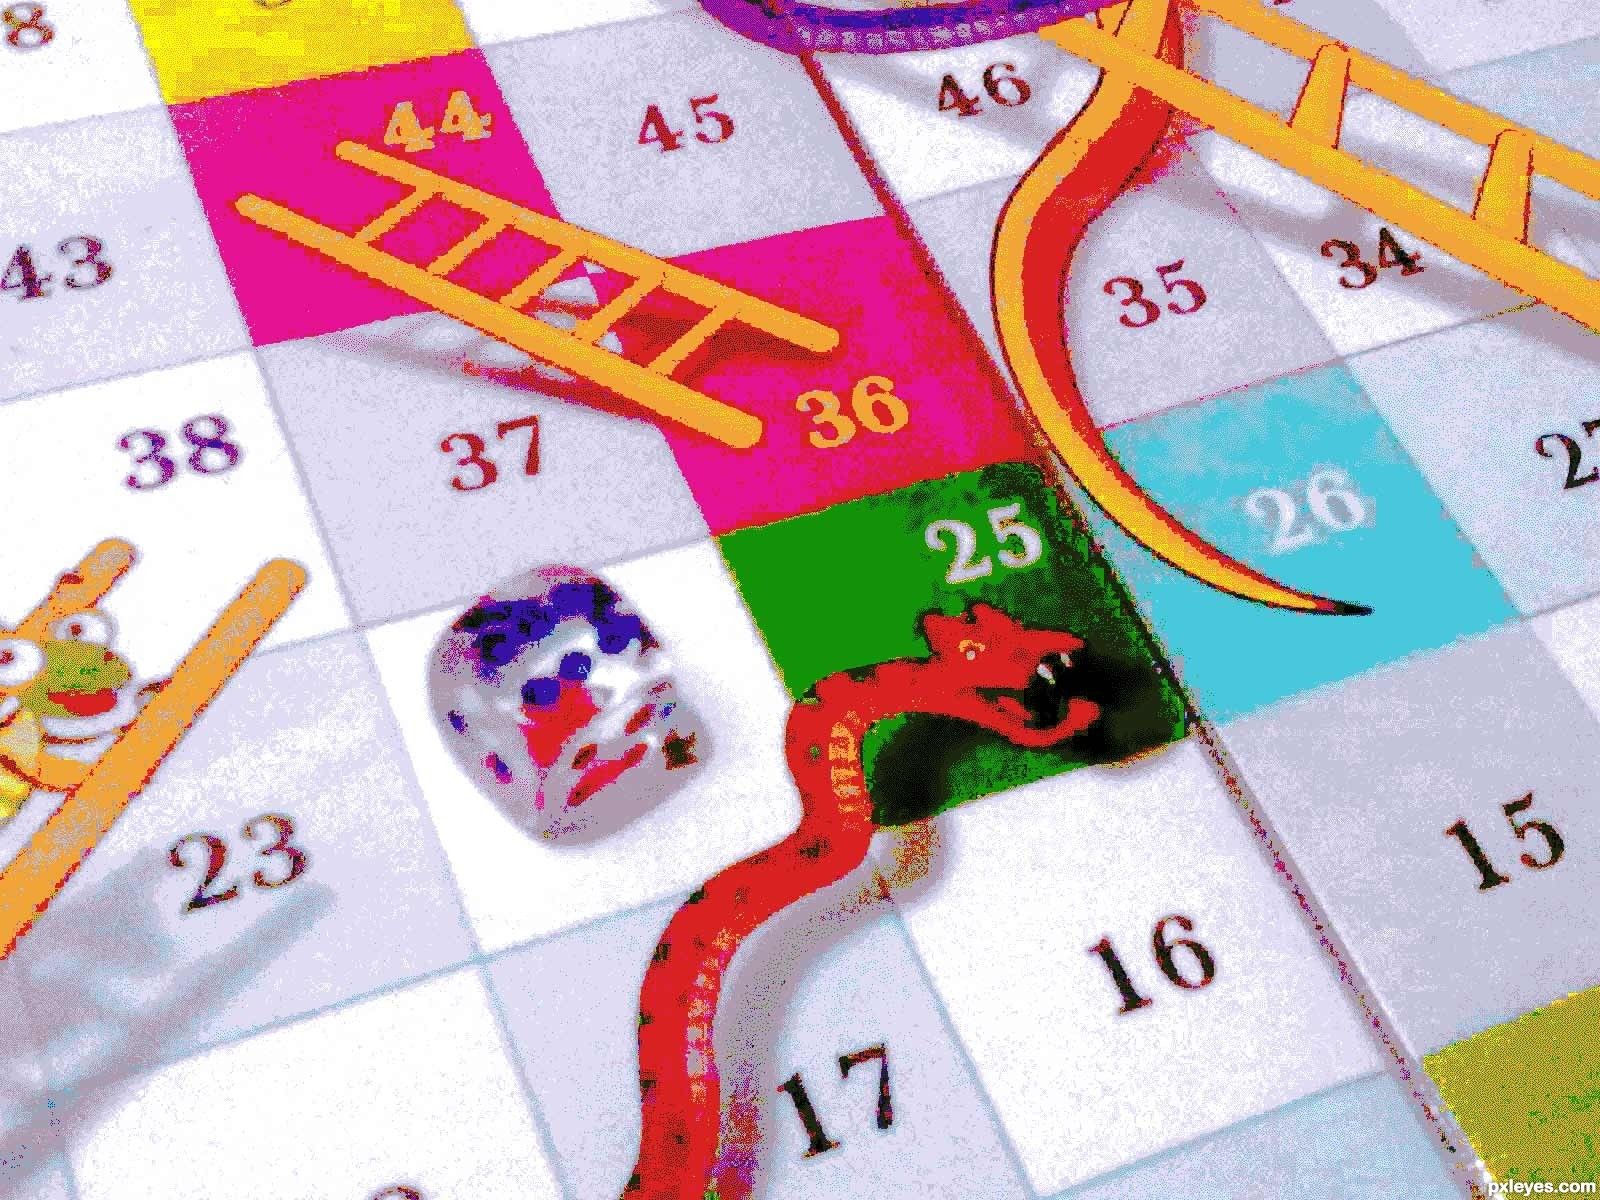 Snakes & Ladders picture, by MadGuyyy for: color depth photohop contest